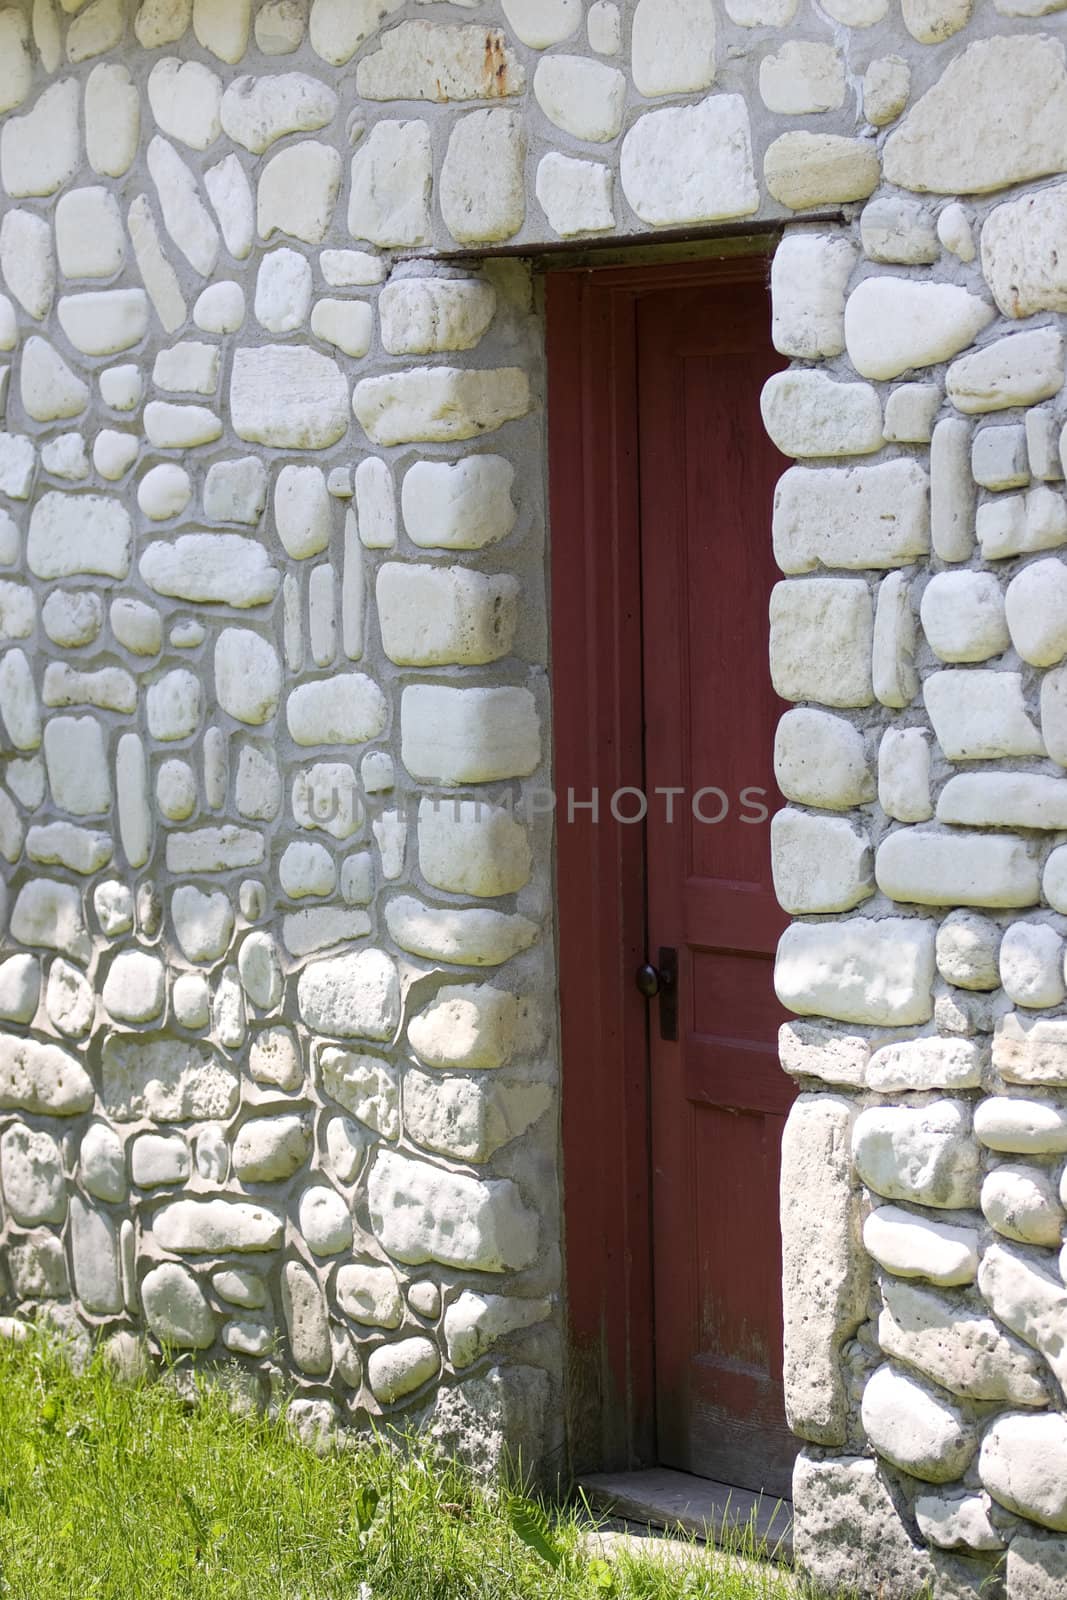 An old door set within a rock wall made up of shore stone from the local rock beaches.  Bruce Peninsula, Ontario, Canada